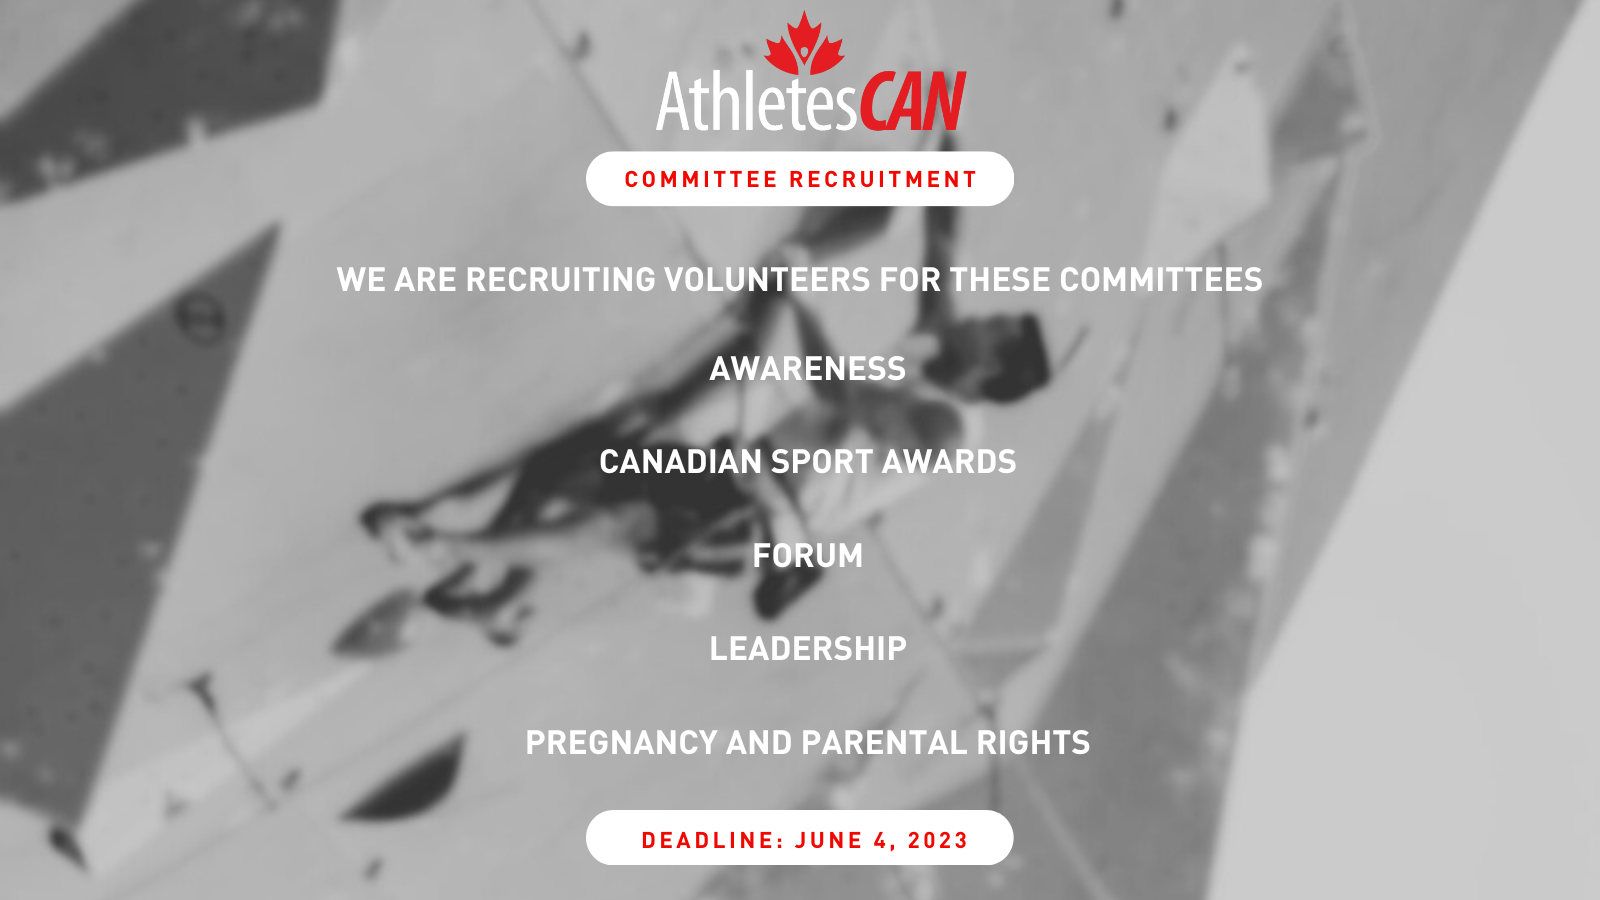 We are recruiting for these committees: AthletesCAN Forum, Awareness, Canadian Sport Awards, Leadership, Pregnancy and Parental Rights Deadline: June 4, 2023